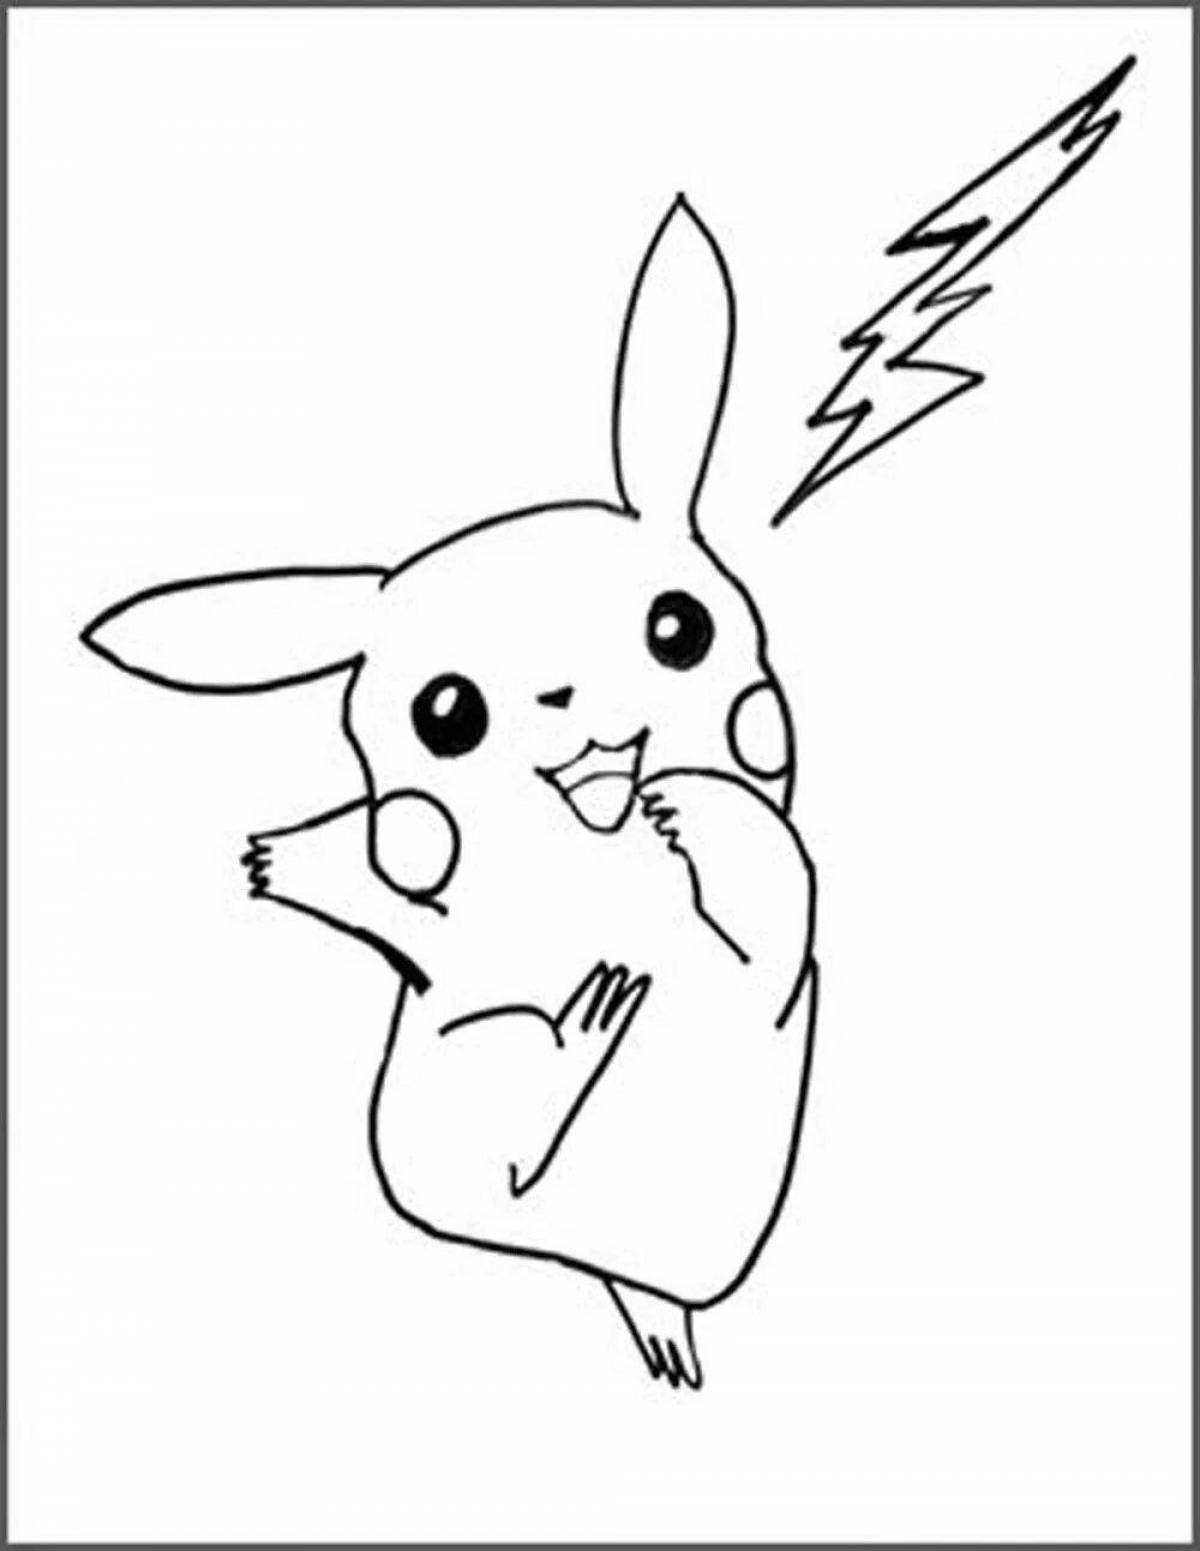 Coloring page playful pikachu with a heart